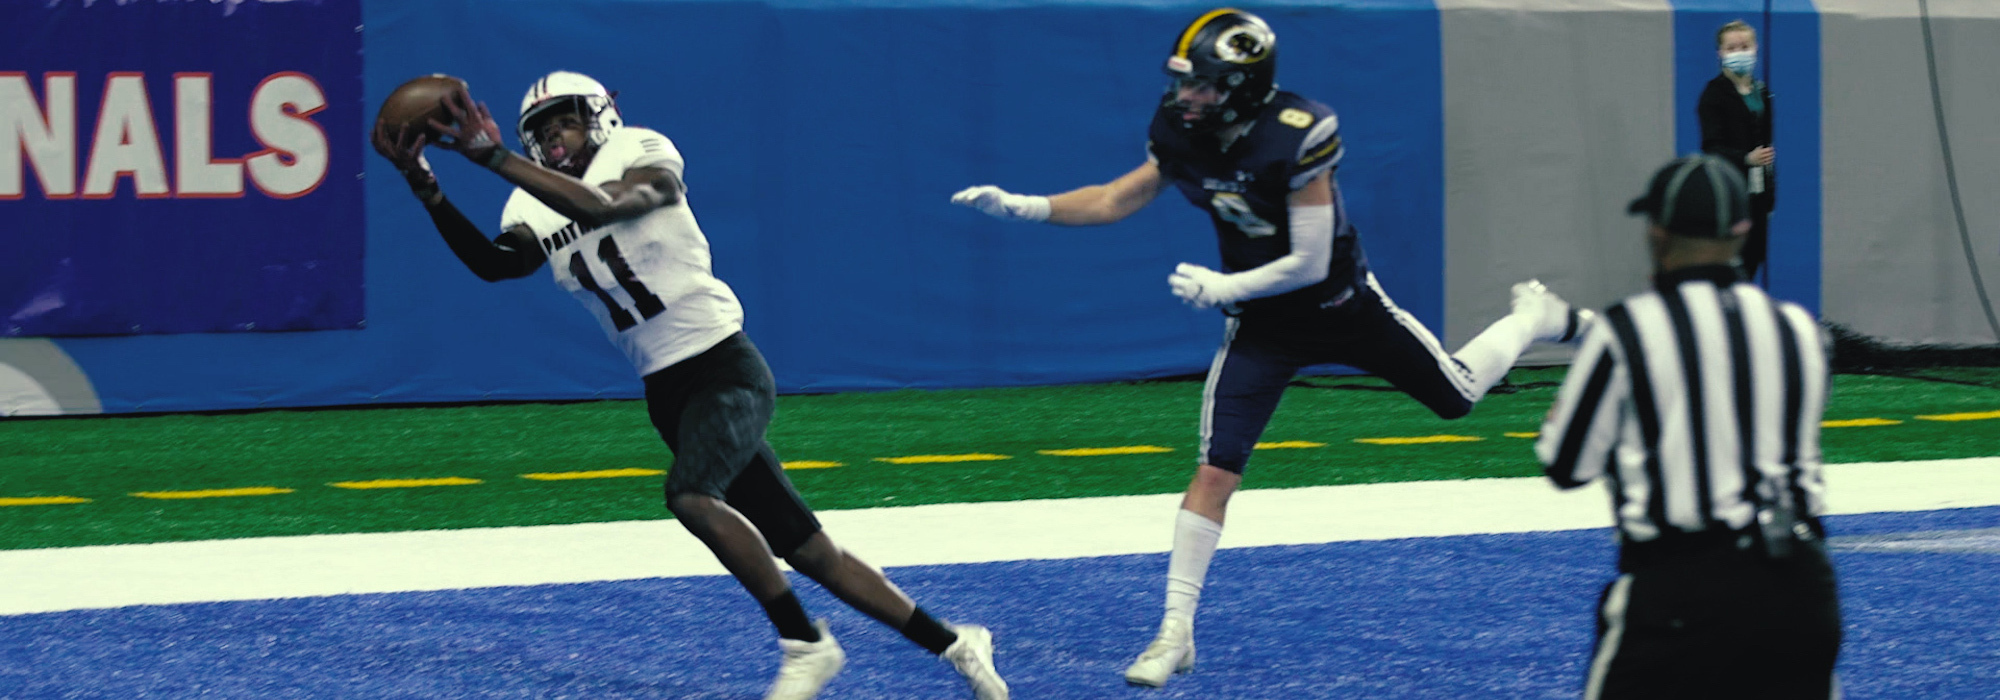 Receiver making a catch at Ford Field